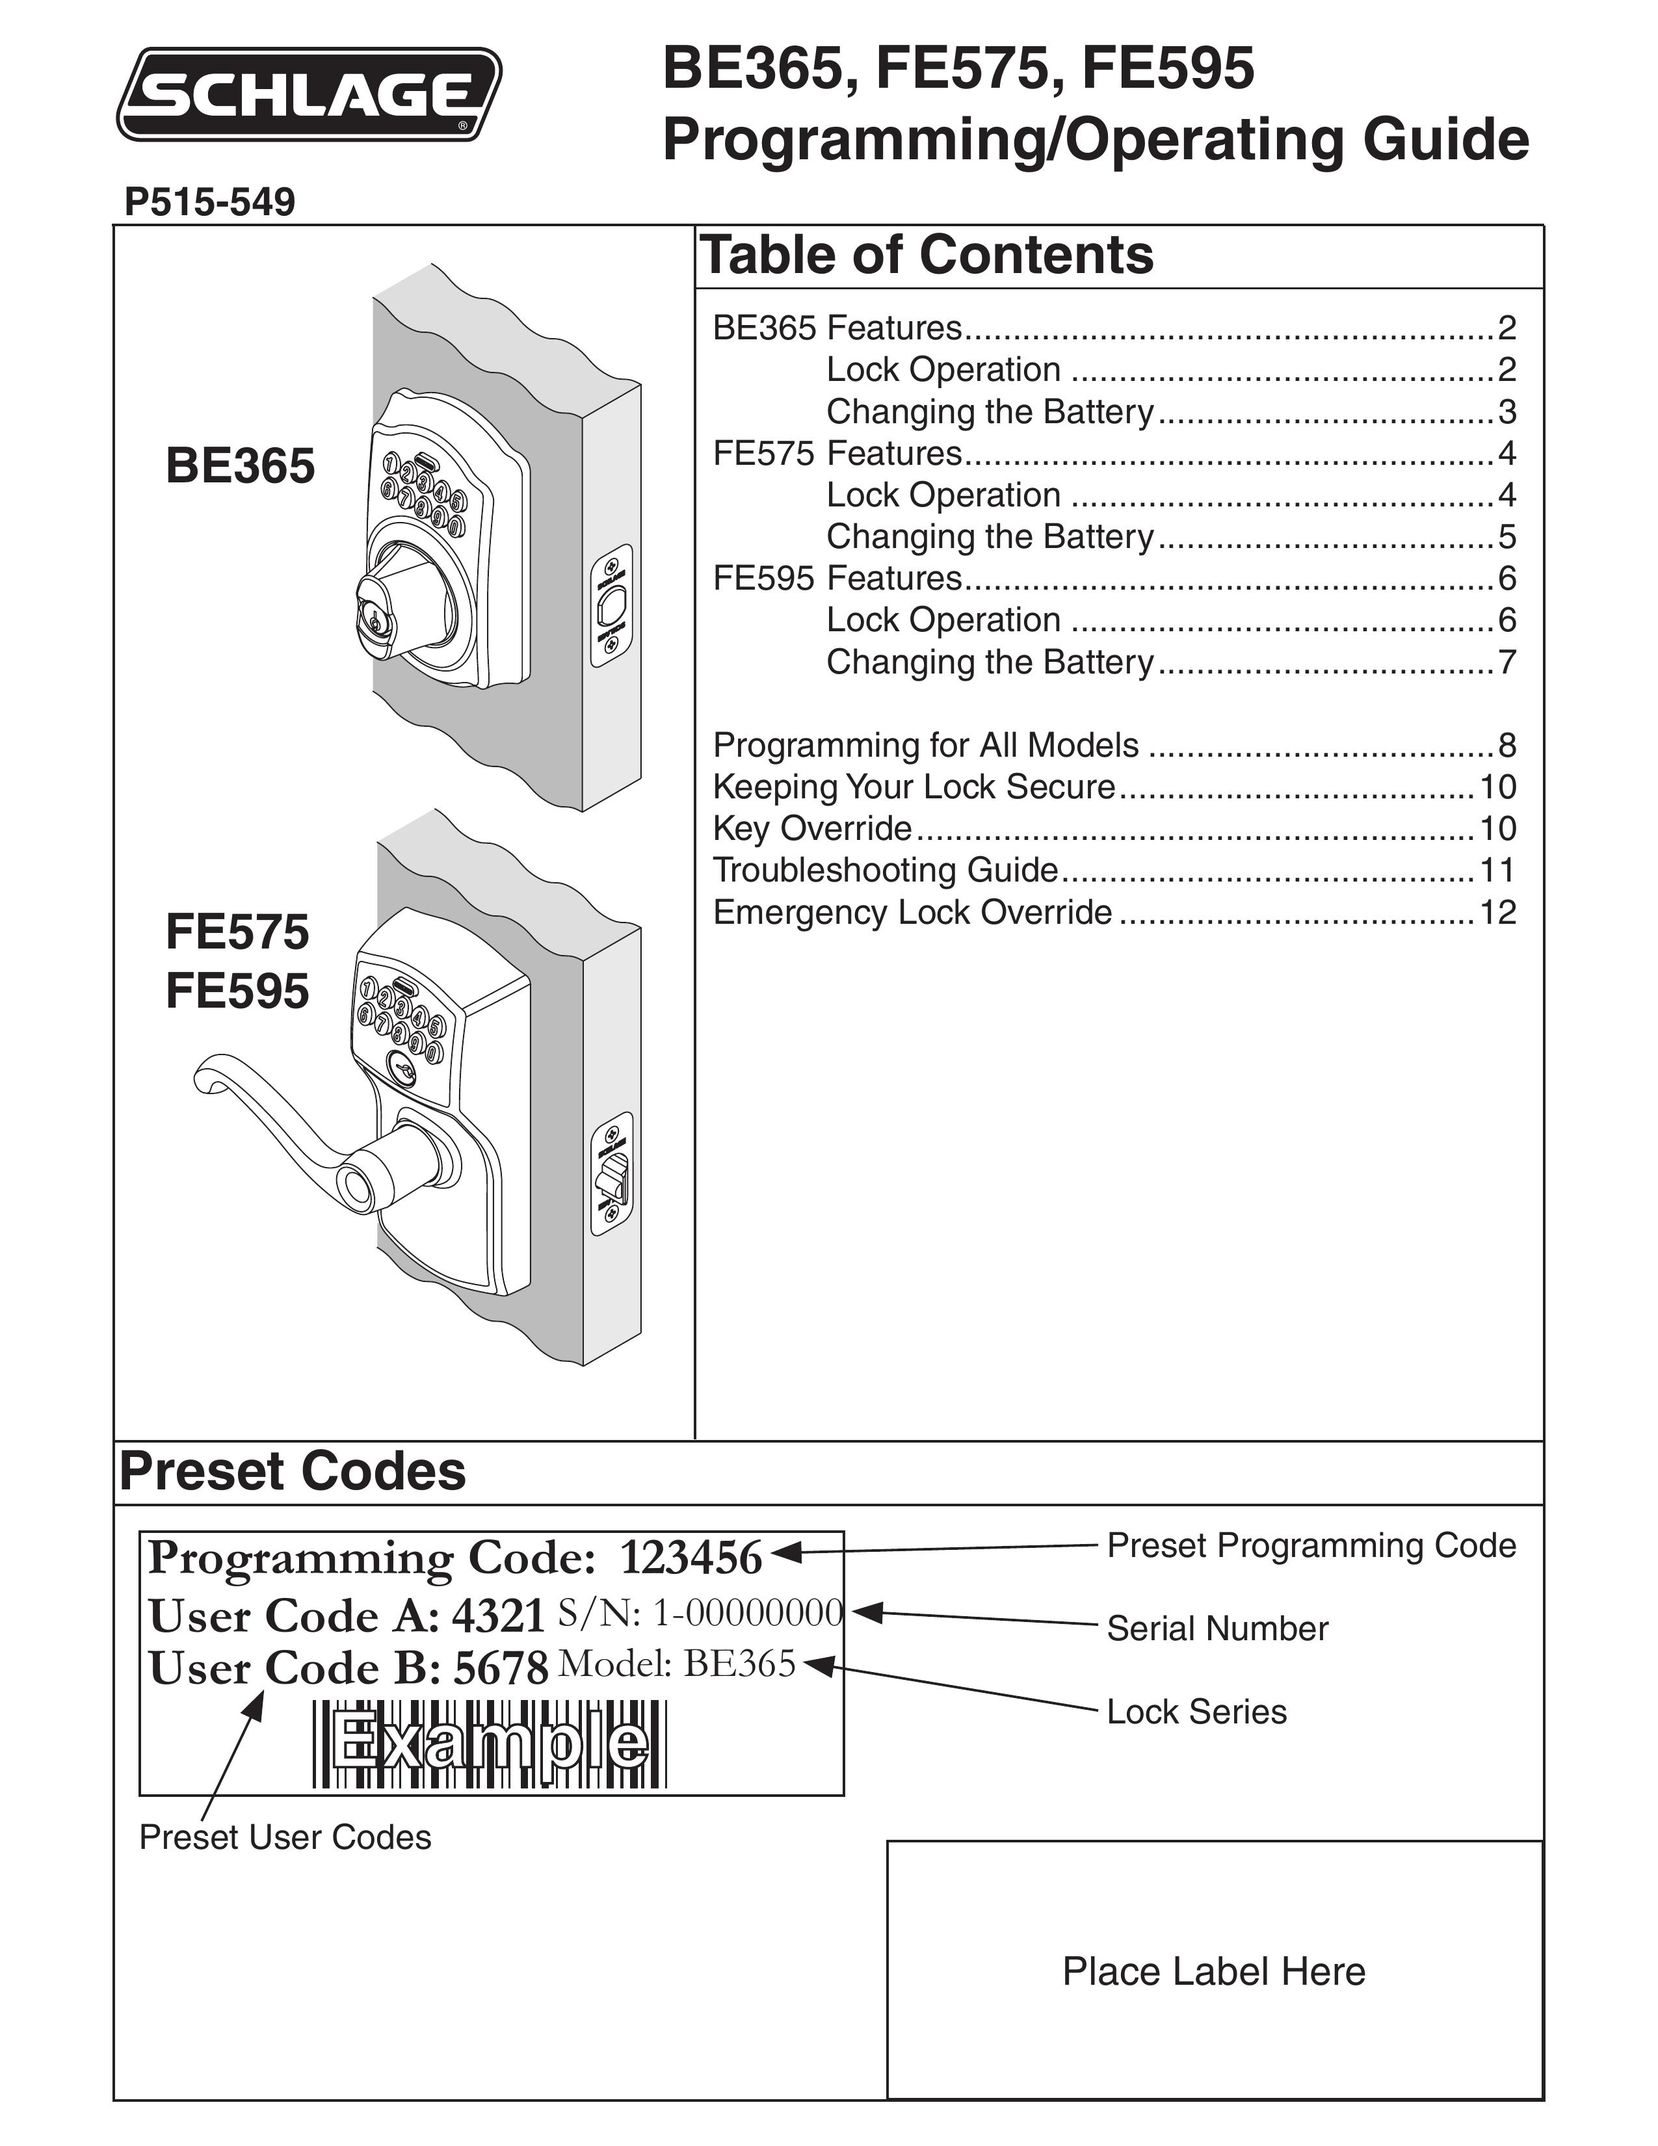 Schlage BE365 Pet Fence User Manual